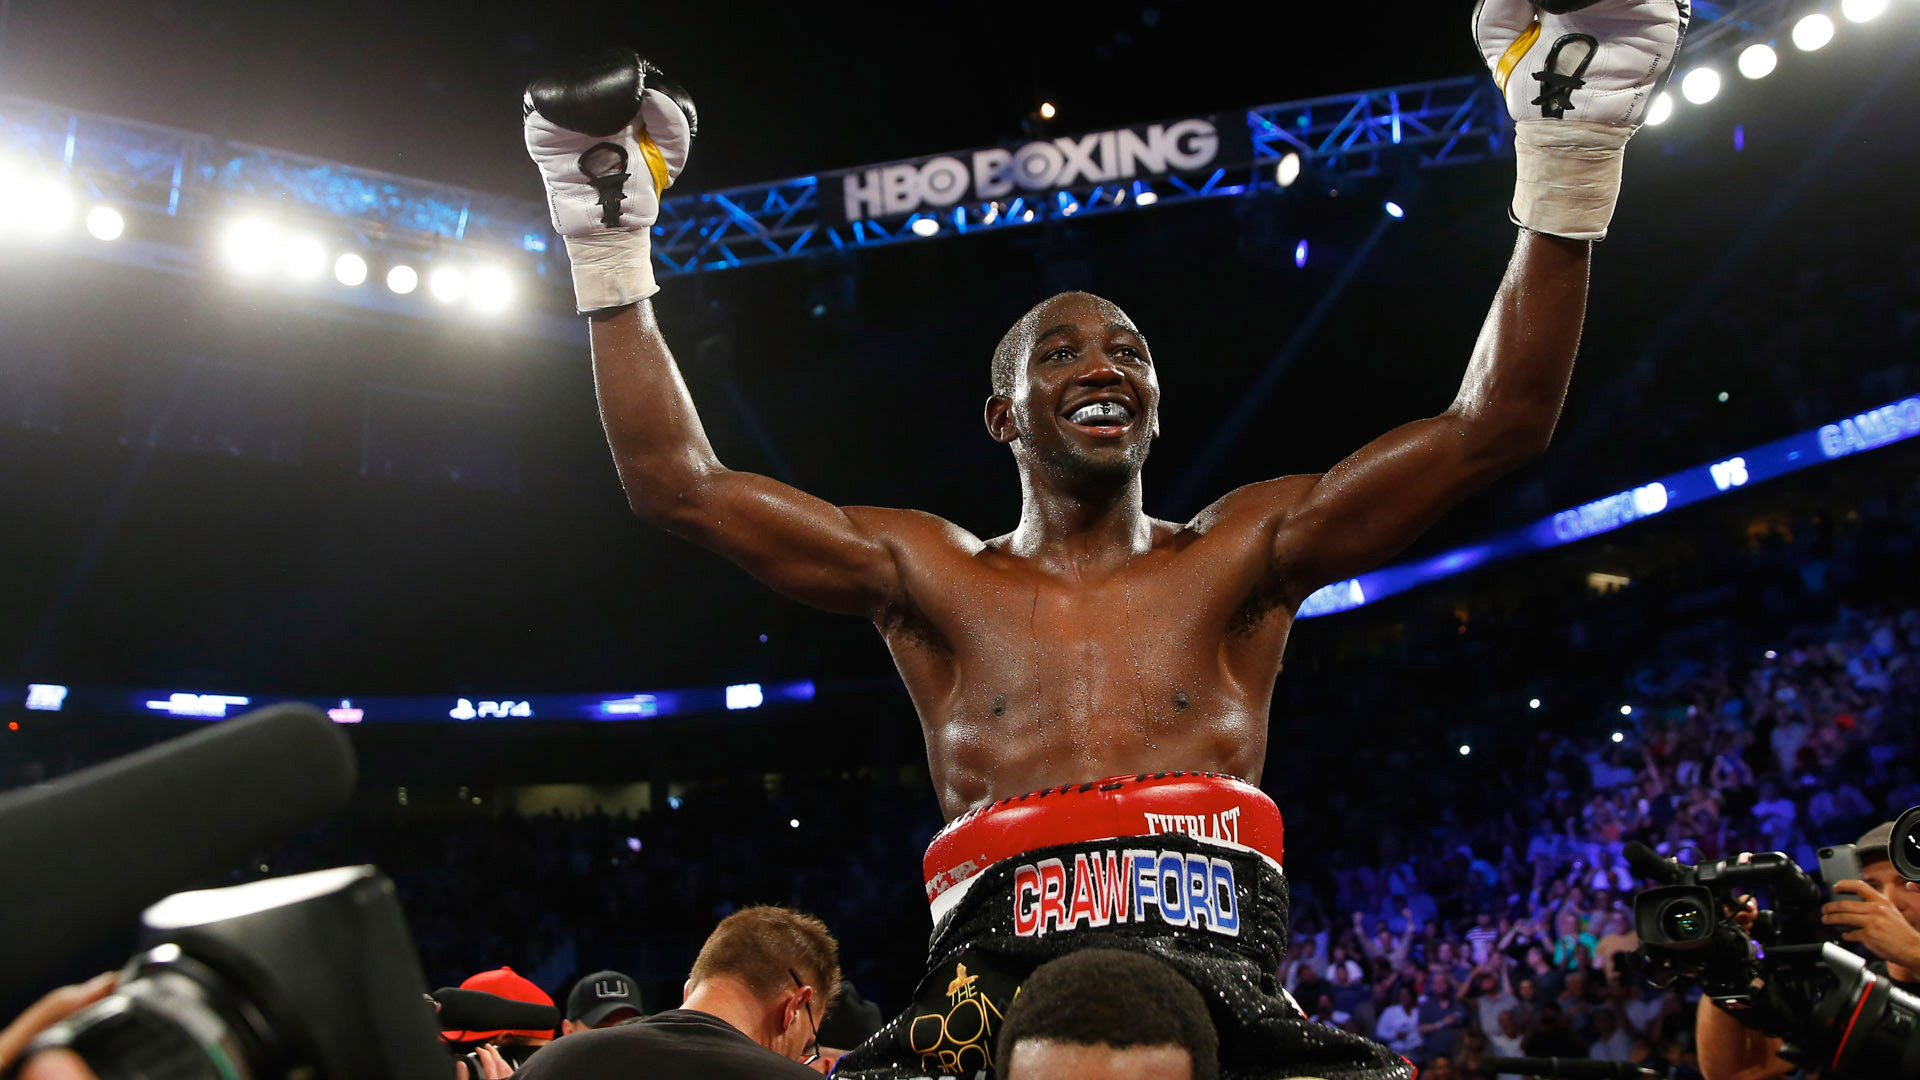 Terence Crawford, Pound-for-pound king, Boxing genius, Unstoppable talent, 1920x1080 Full HD Desktop